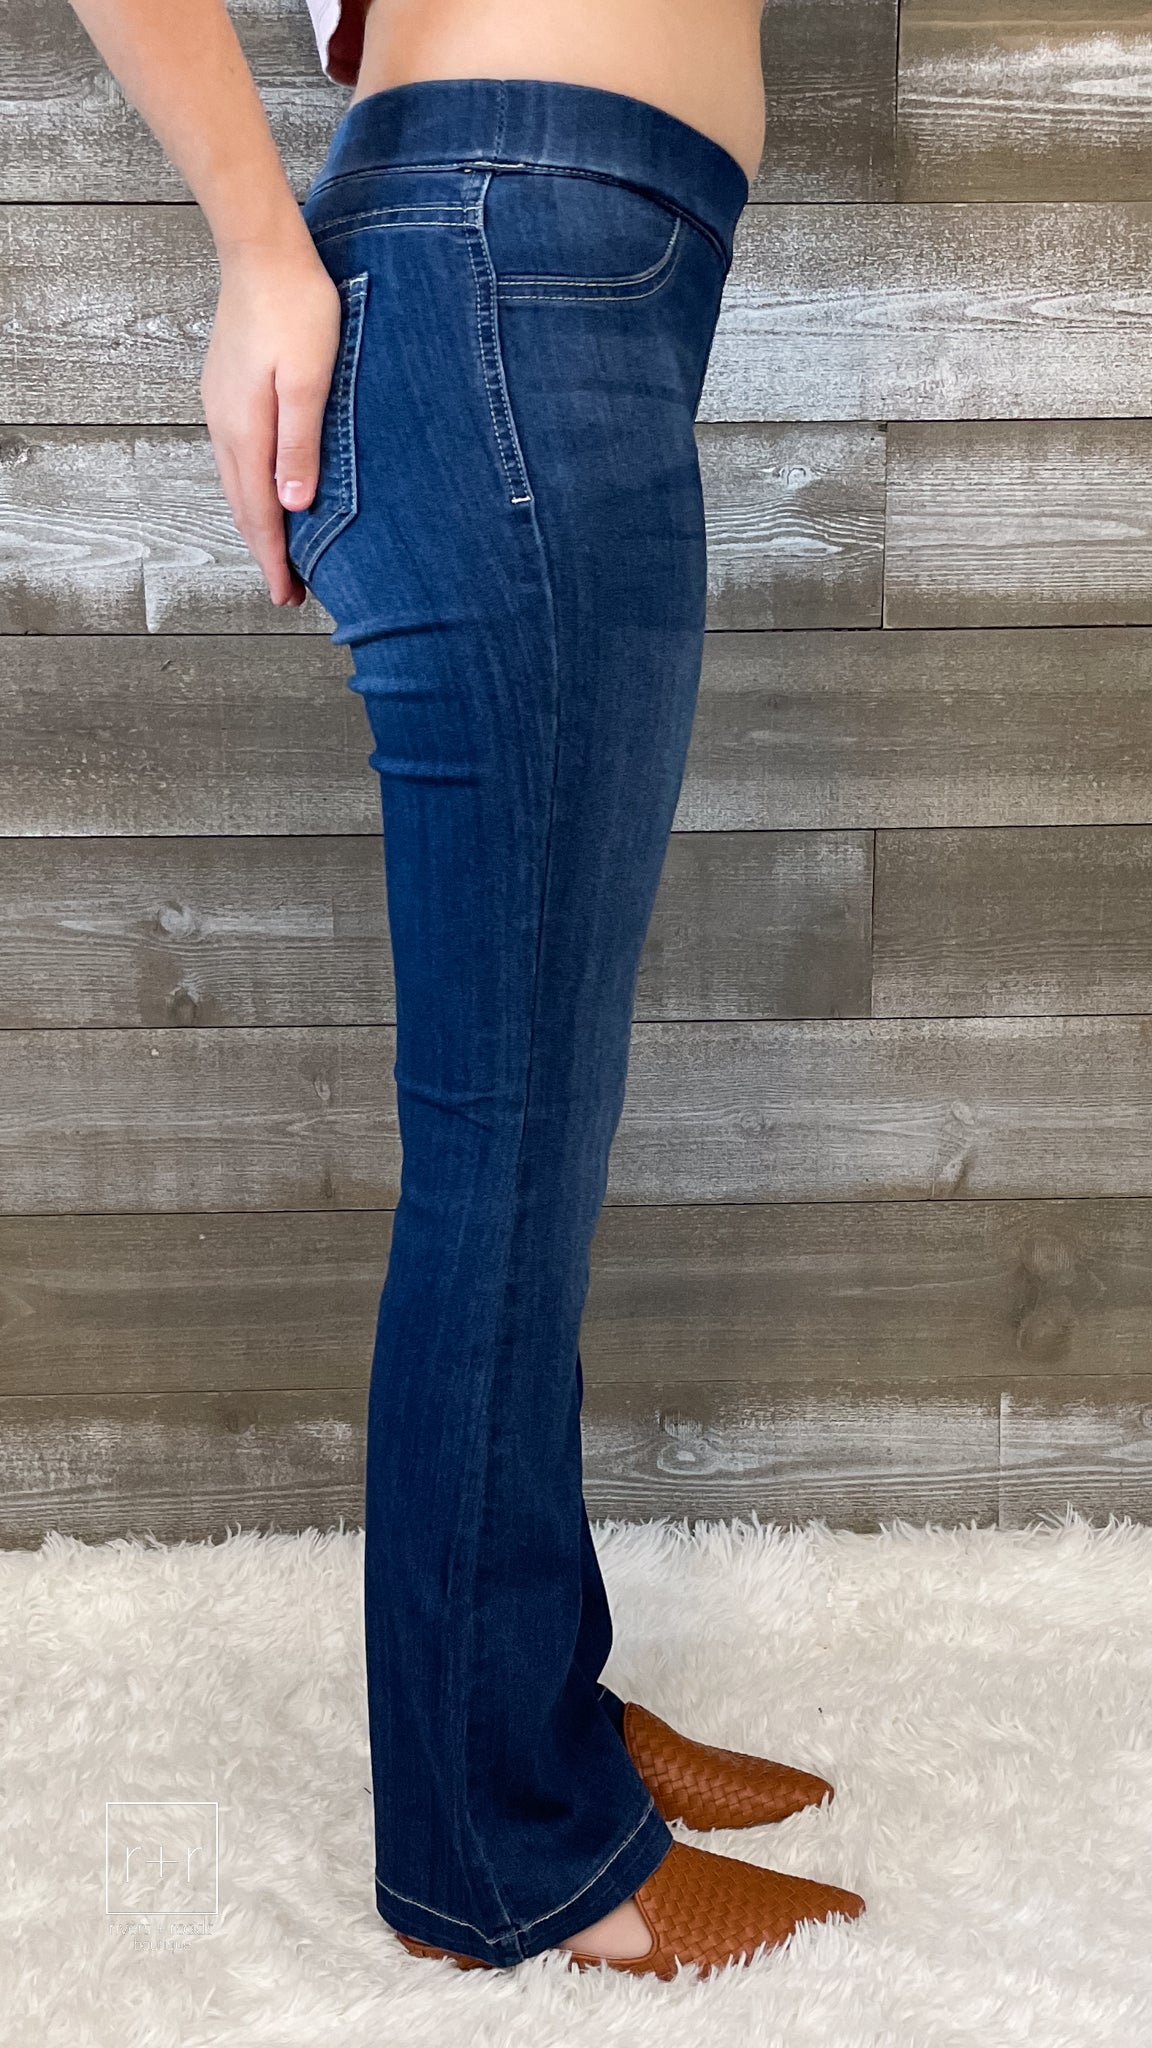 cello jeans dark wash pull on petite flare jeans in a jegging style AB35324DK - 30